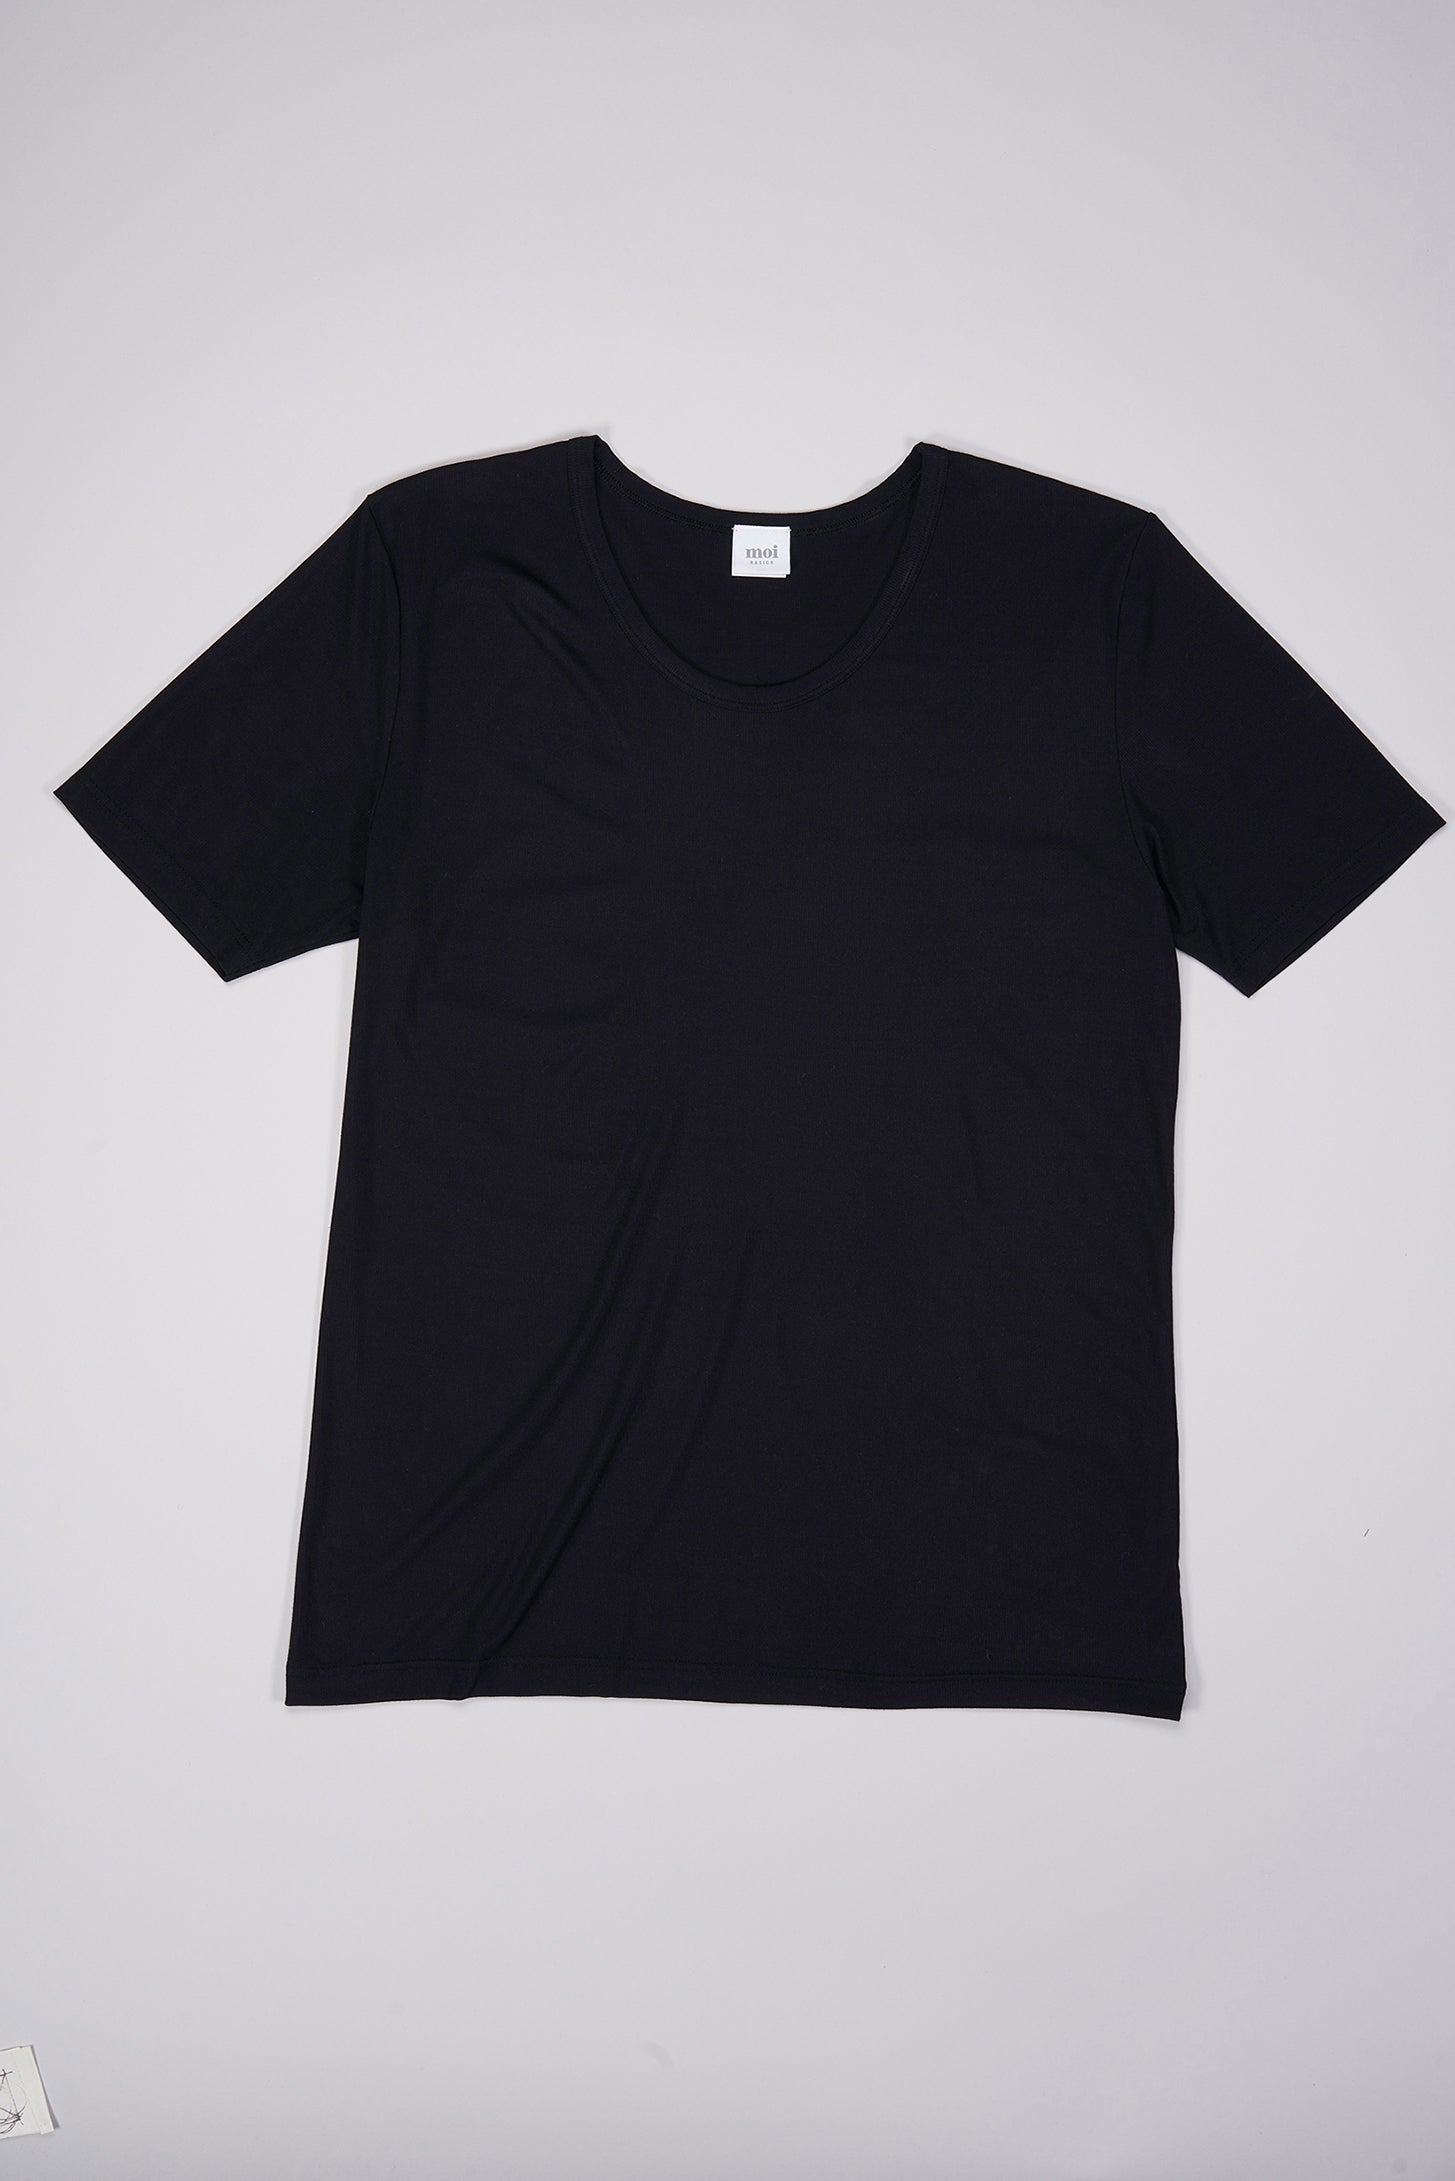 T-shirt in black made from natural MicroModal from moi-basics